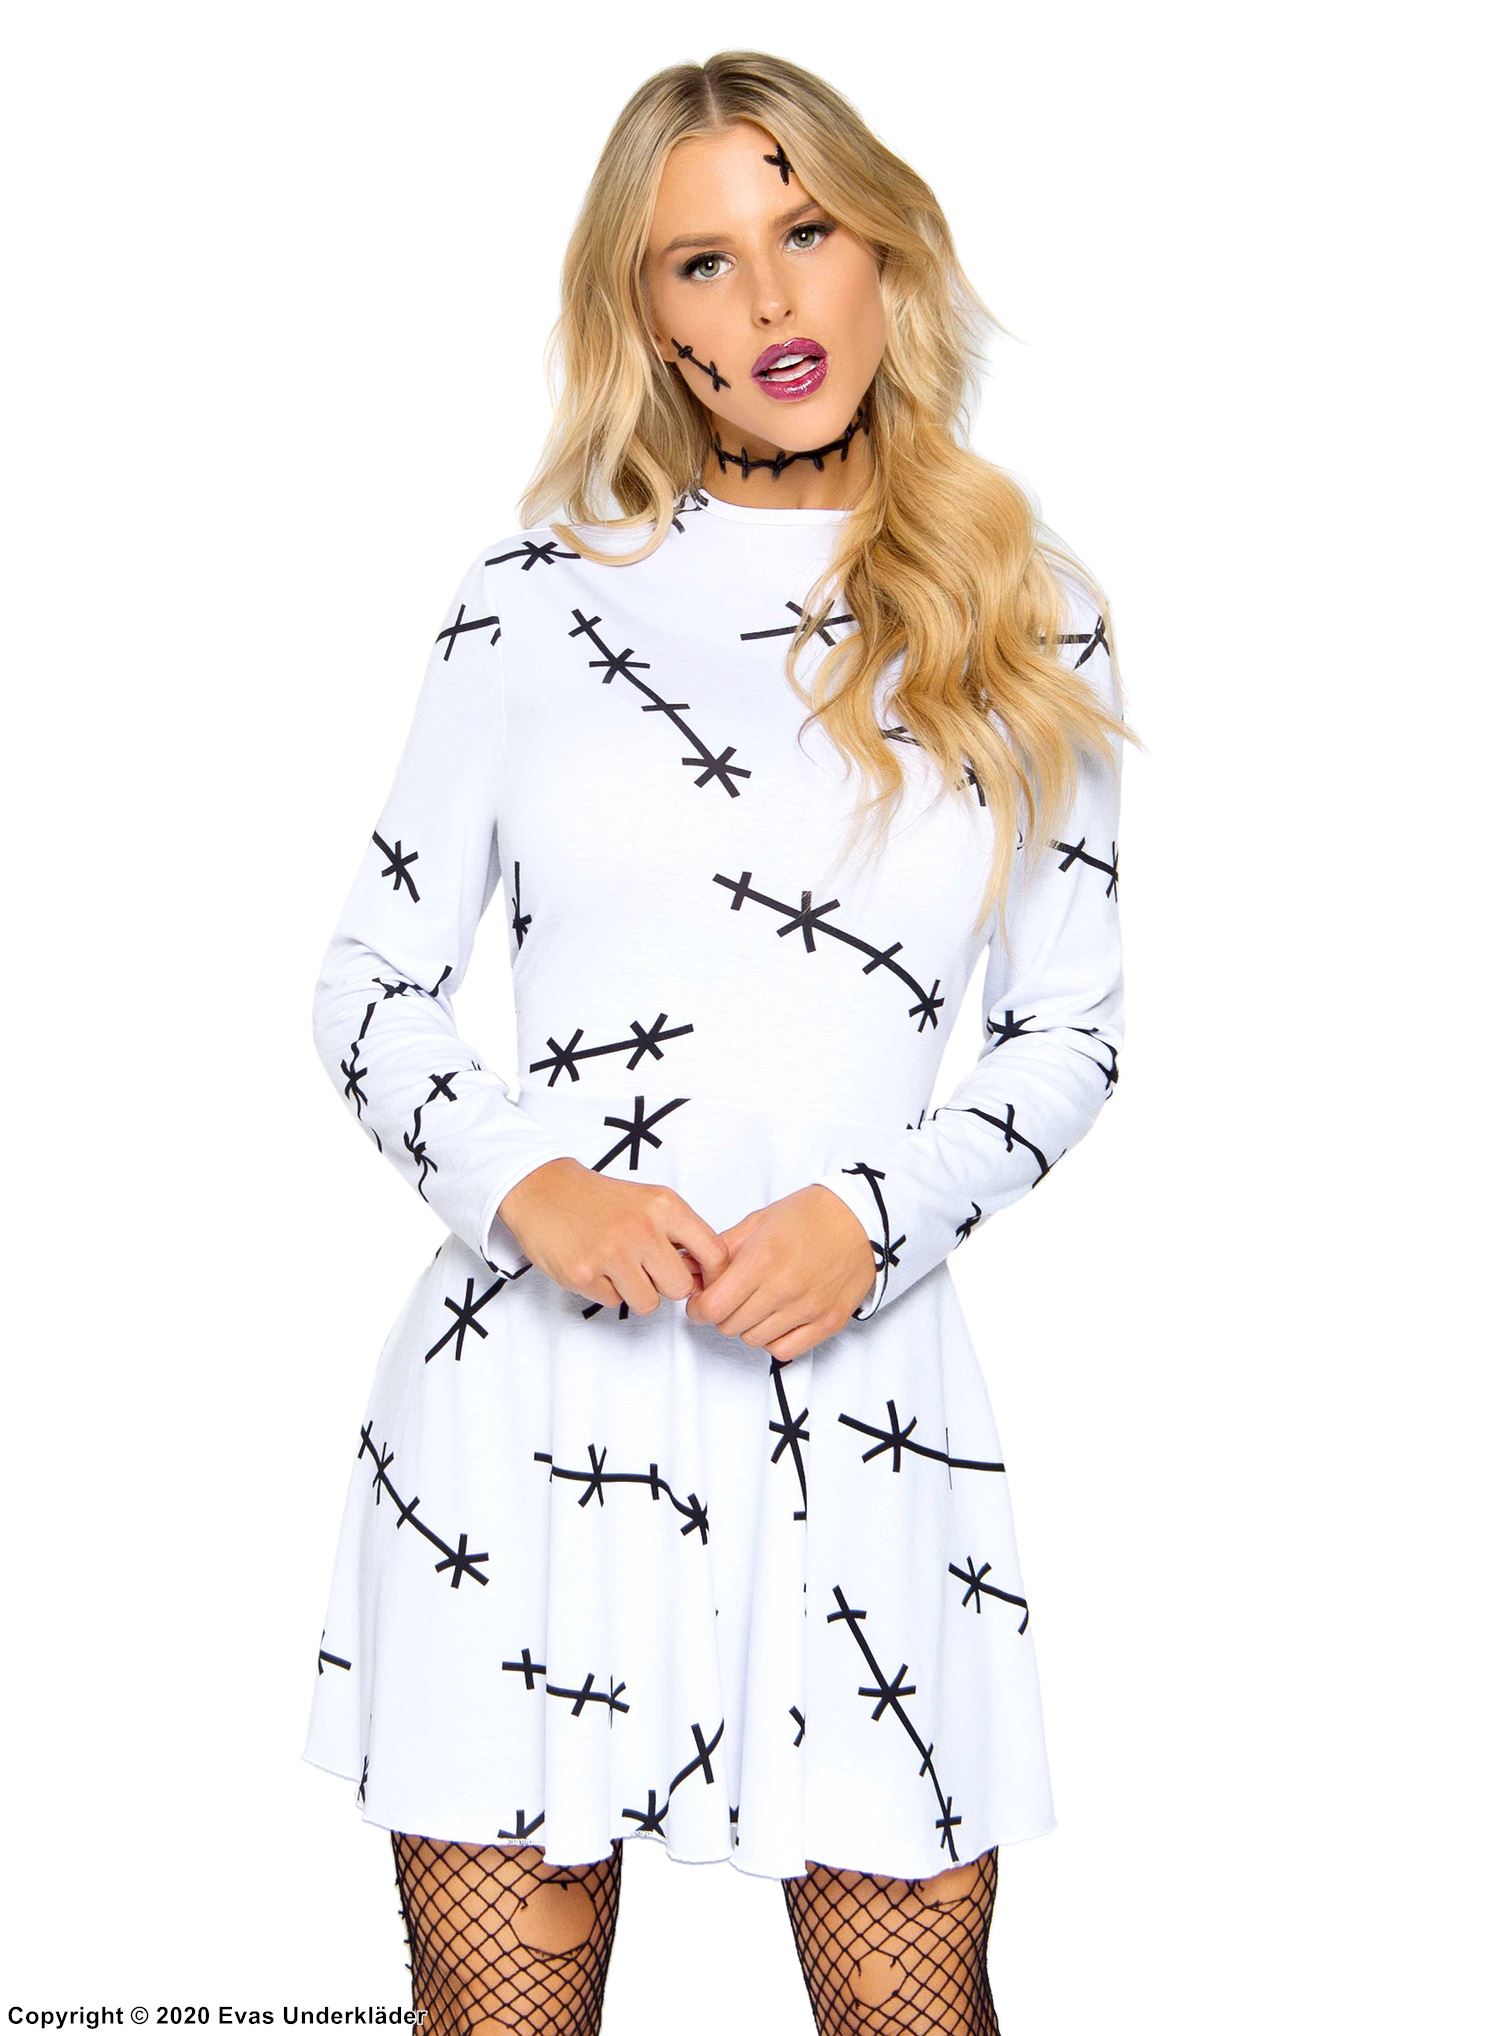 Costume dress, long sleeves, stitches